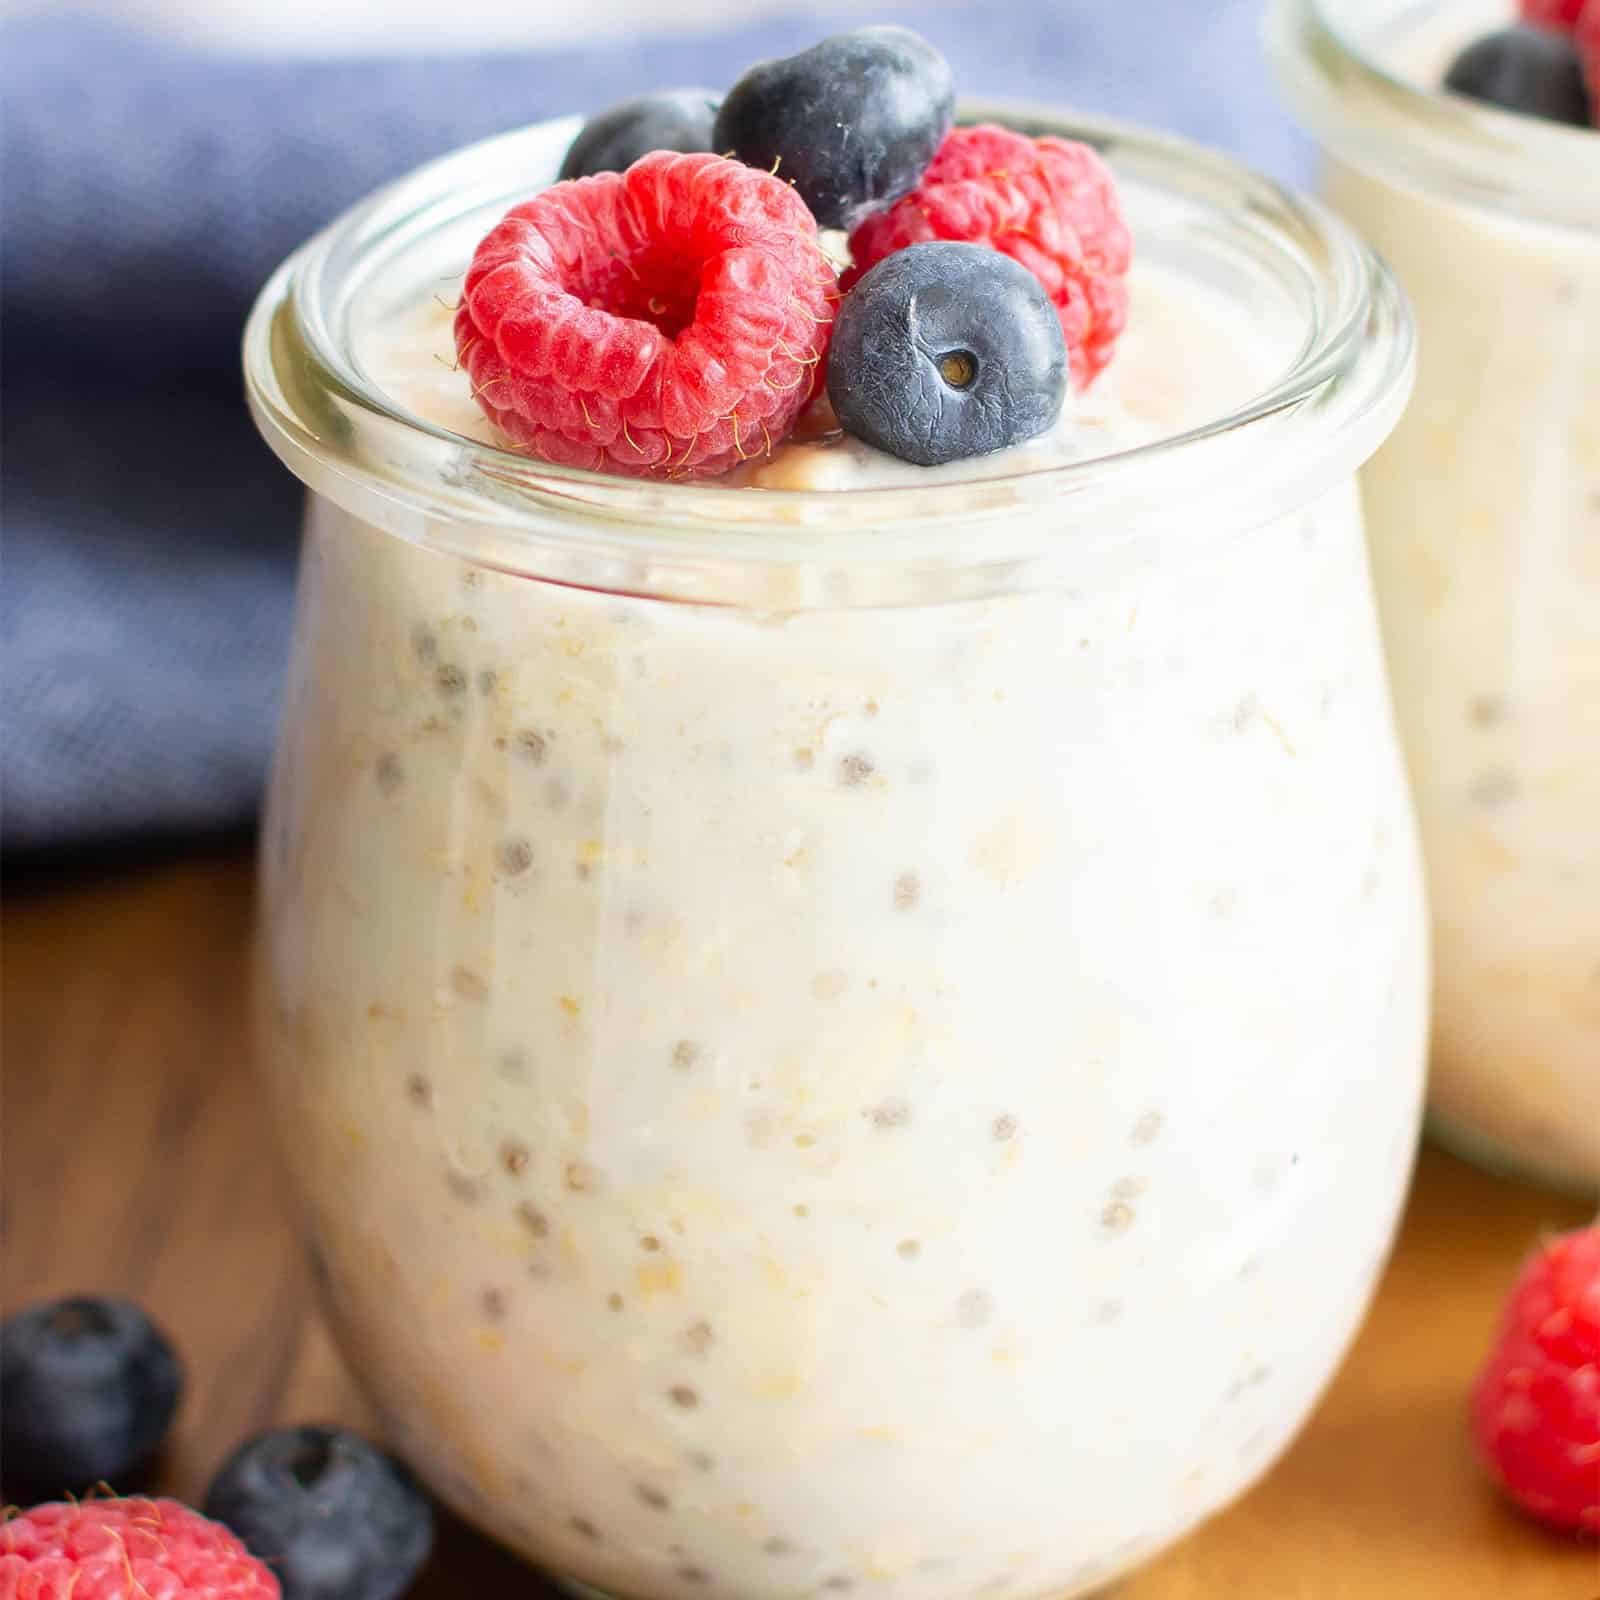 The seventh way to make overnight oats vegan: easy classic overnight oats.